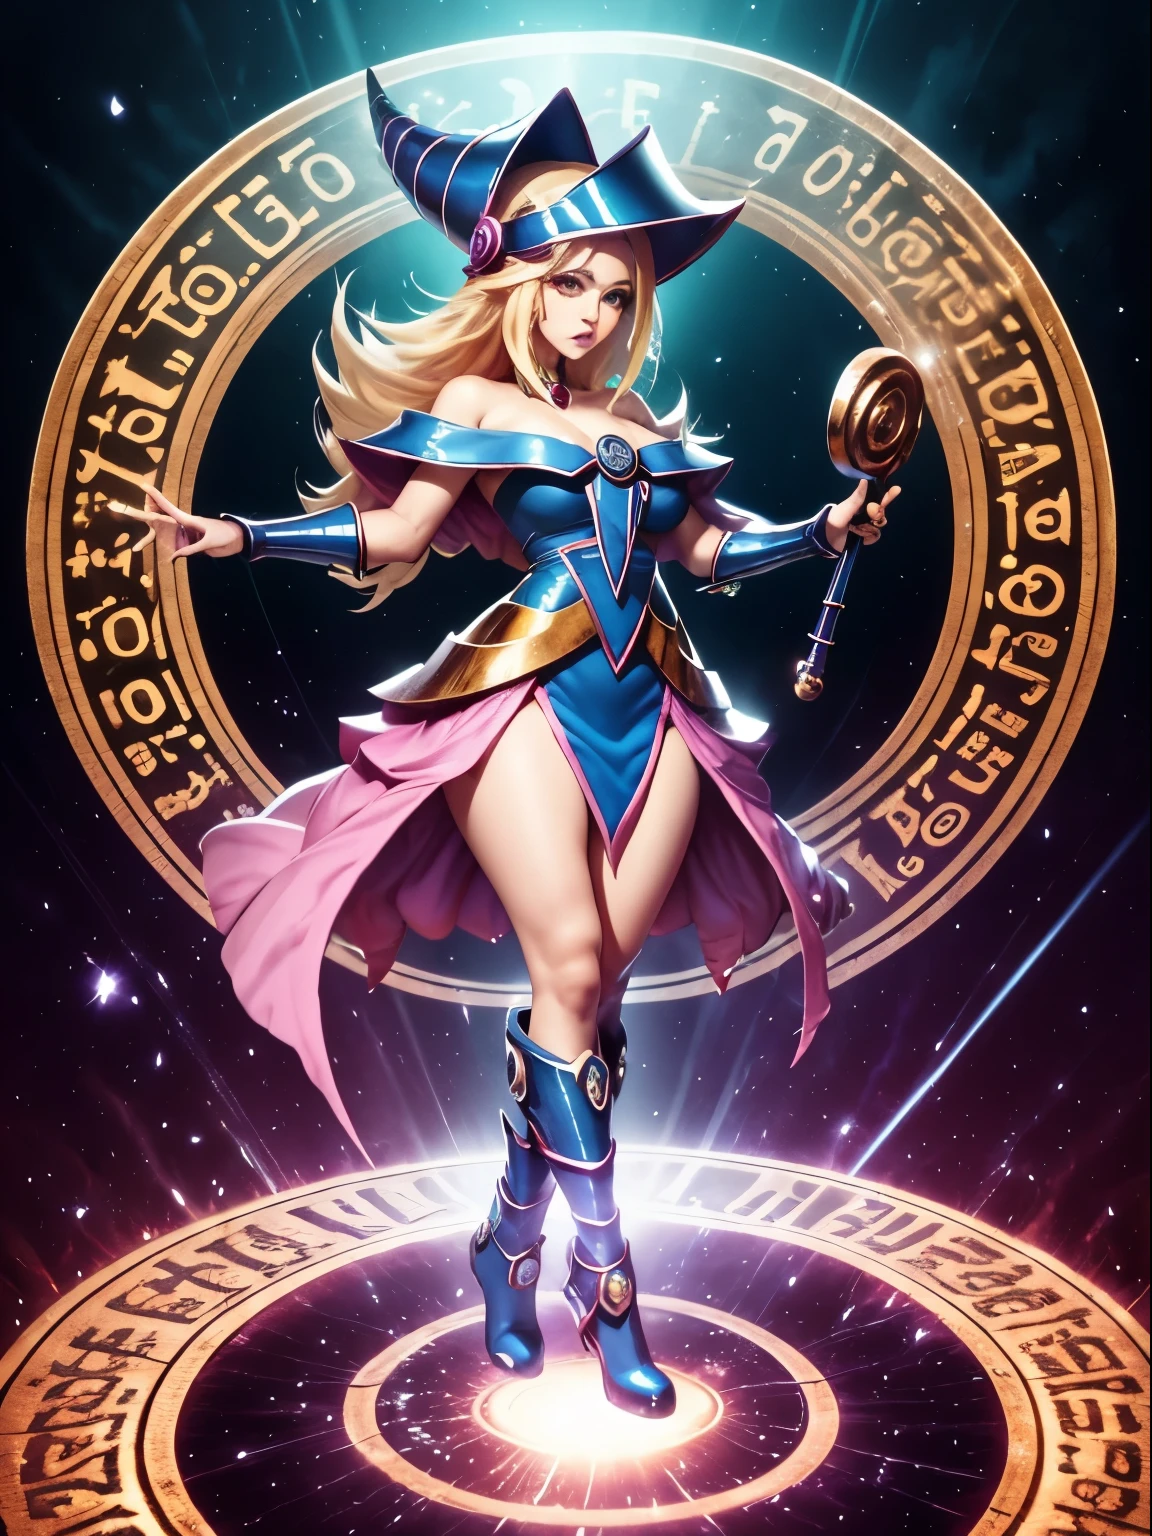 ultra-detailed, extremely detailed, Masterpiece, sthe highest qualit, The best quality, absurdities, highres, dark magician girl, (1girl: 1.2), Alone, detailed face, dynamic  pose, hair flow, (whole body: 1.1), blond hair, long hair, looking at the viewer, green eyes, skindentation, detailed skin, skin pores, (shiny skin, shiny skin: 1.1), Pink leather details, old, toenail polish, Skirt, blue shoes, blue hat, Wizard hat,  Wand, holding hat, (blue panties: 0.9), (summoning circle: 1.1), hexagram, pentacle, staff, yu-gi-oh!, duel monster, Purple Magic Field, radiance, detailed background, intricate background, Subjective and sensual pose